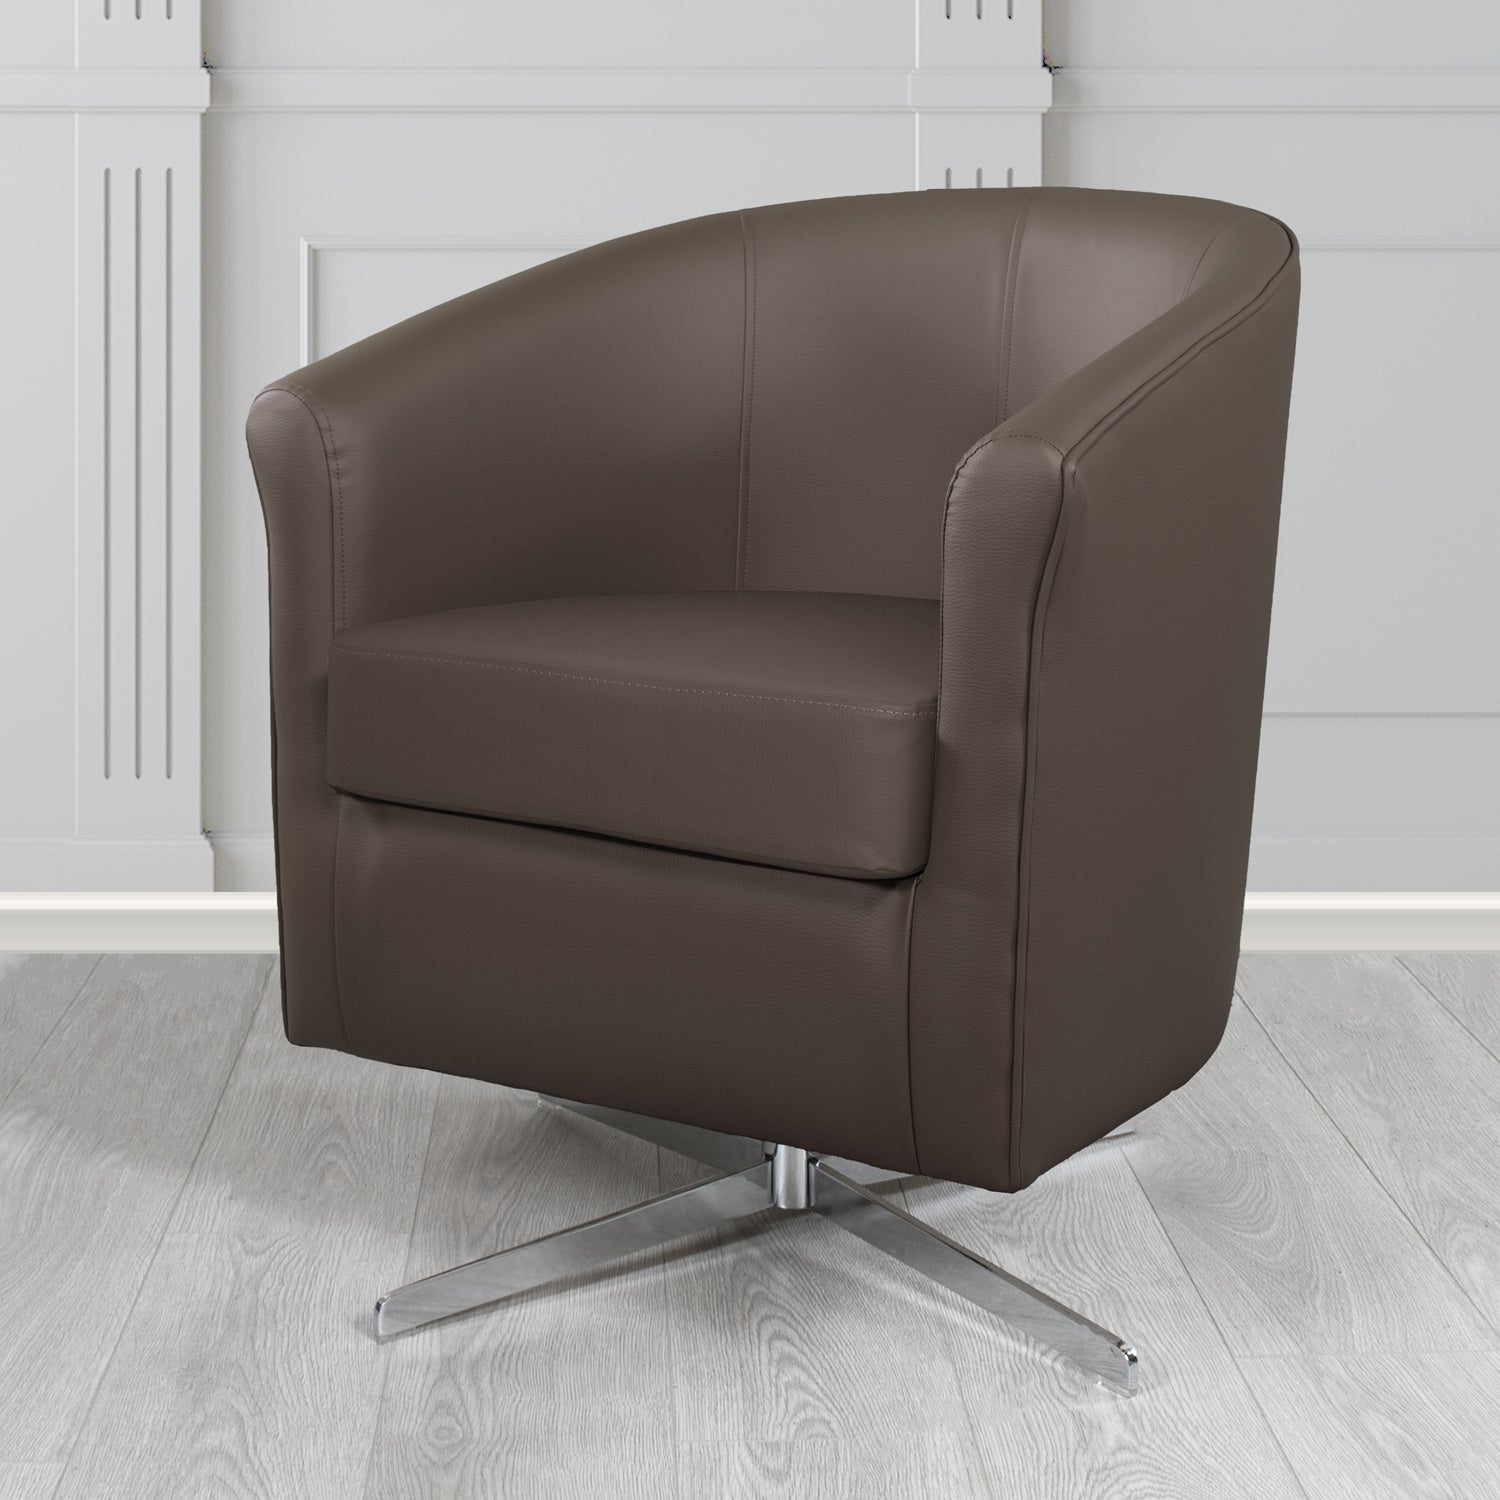 Cannes Swivel Tub Chair in Madrid Chocolate Faux Leather - The Tub Chair Shop